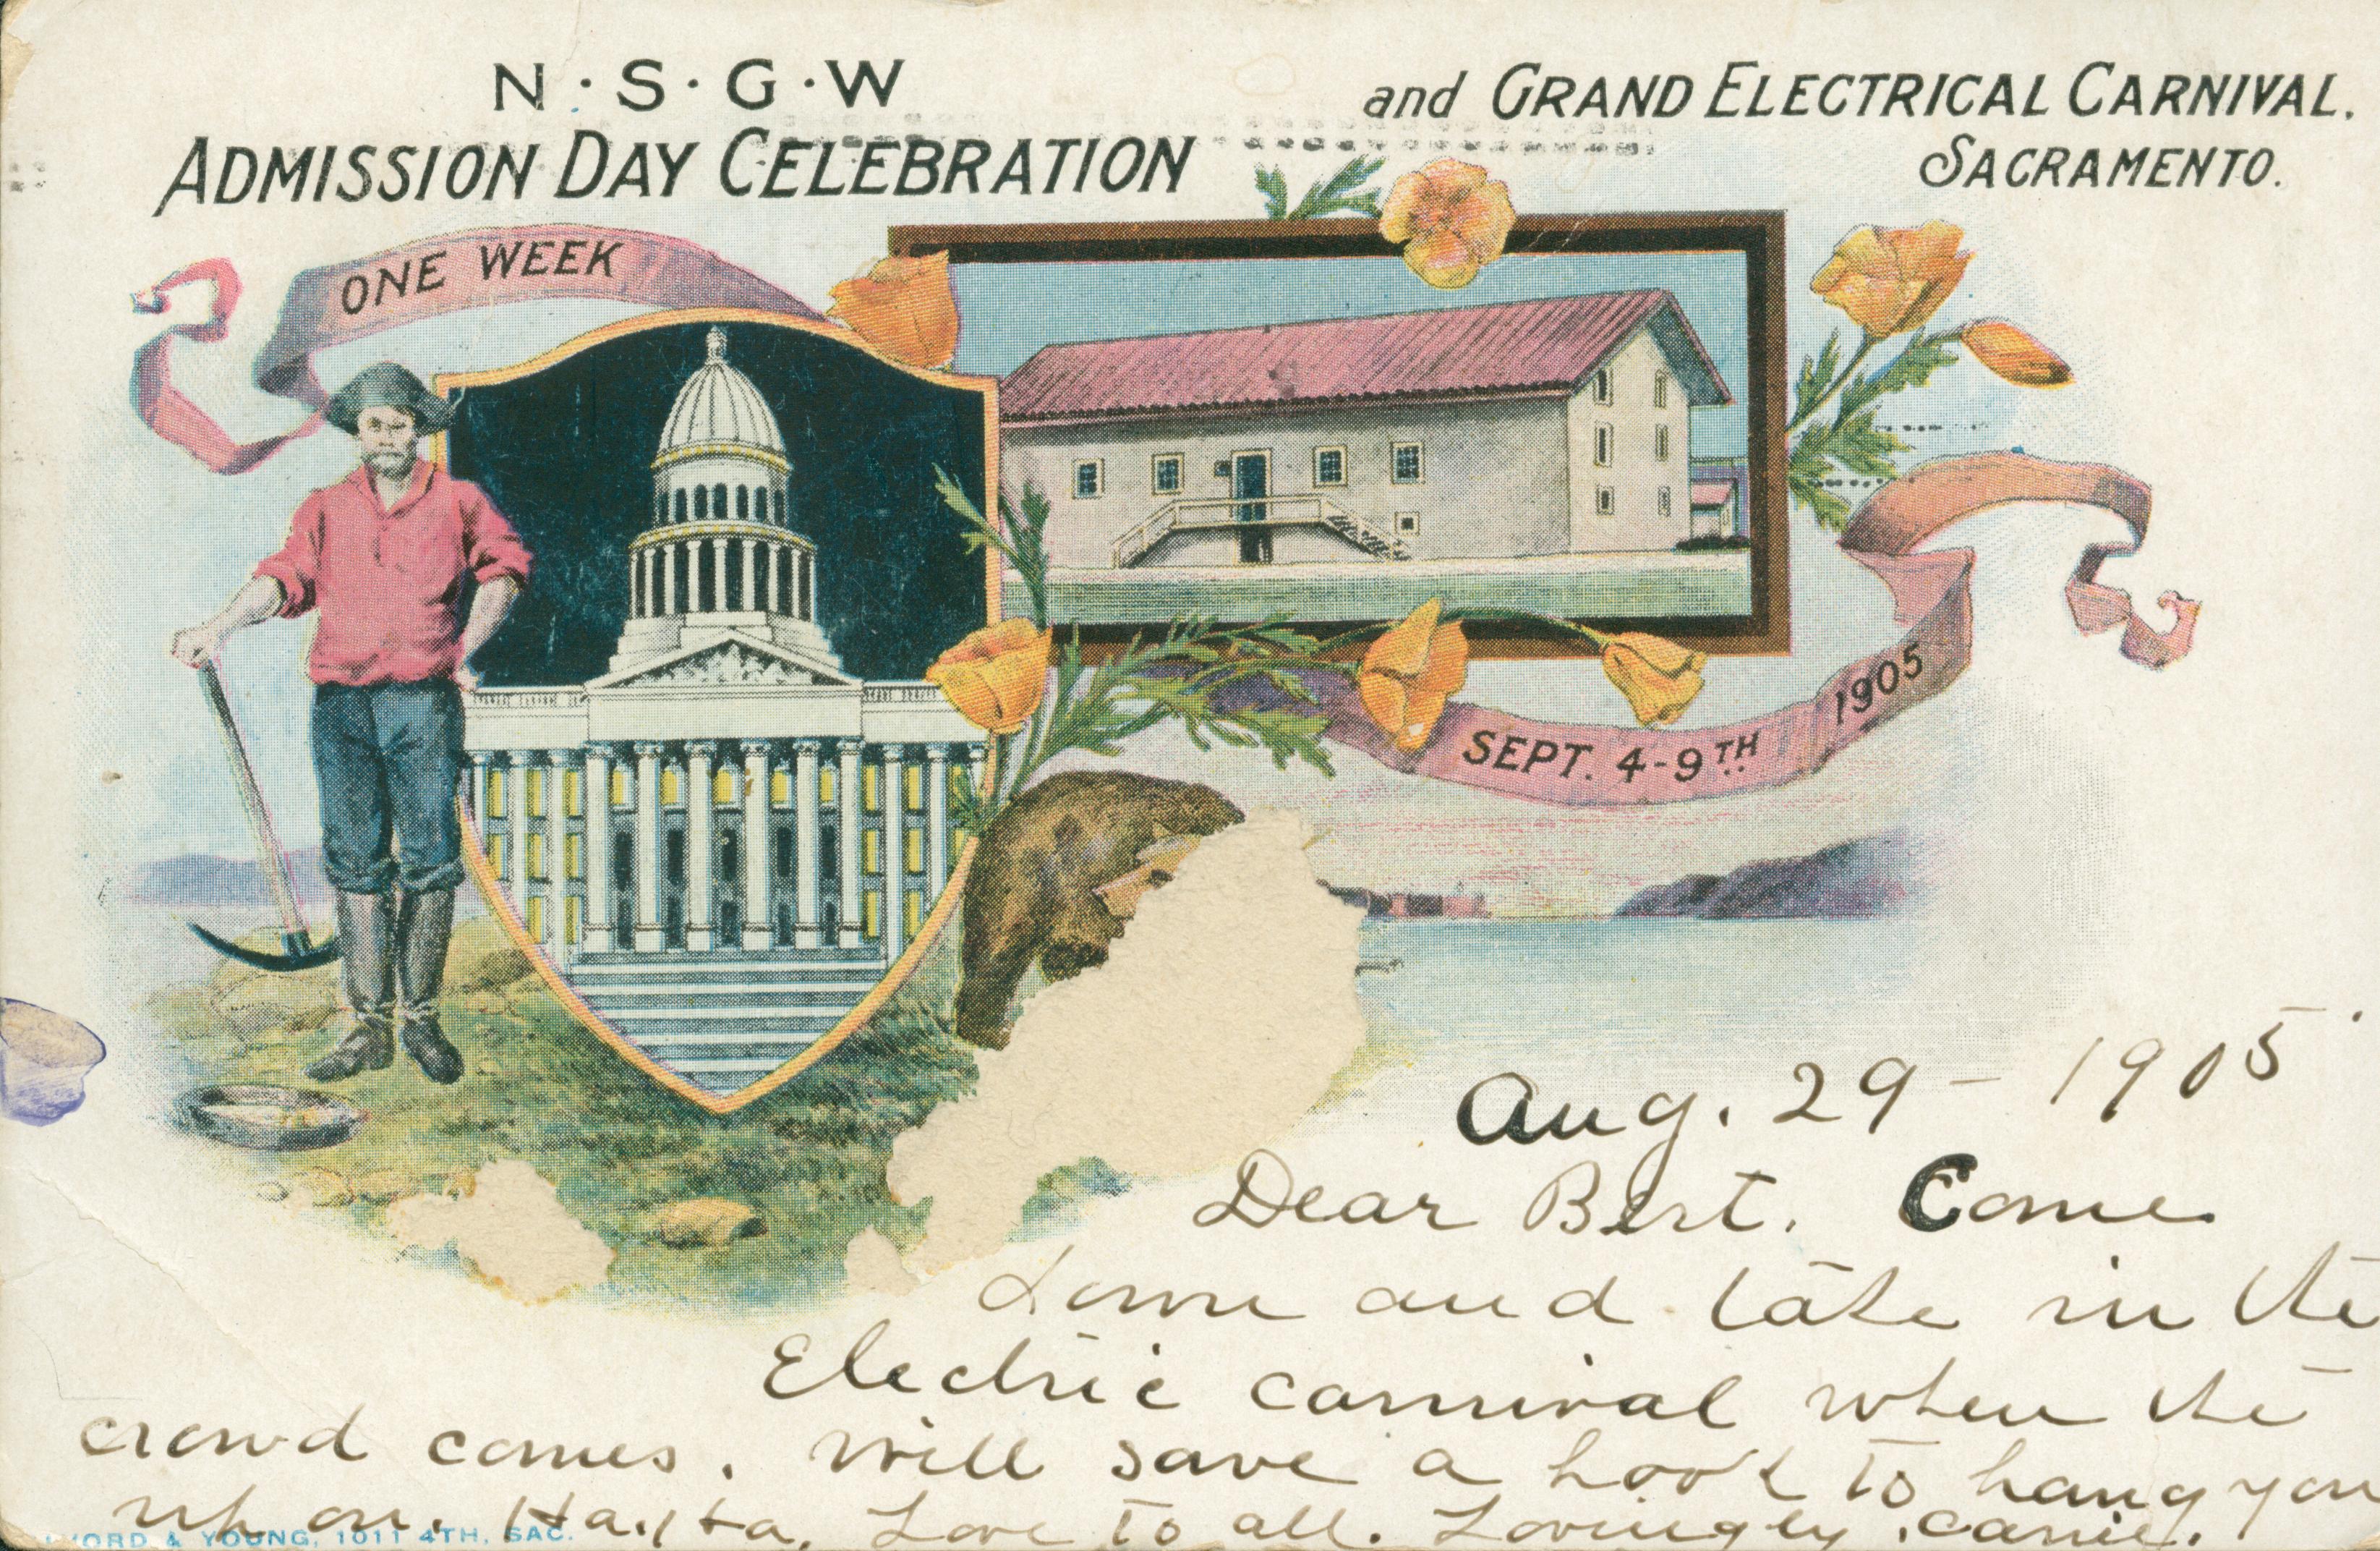 This postcard shows vignettes of Sutter's Fort and the State Capitol, surrounding them are images of a river, a bear and a gold miner.